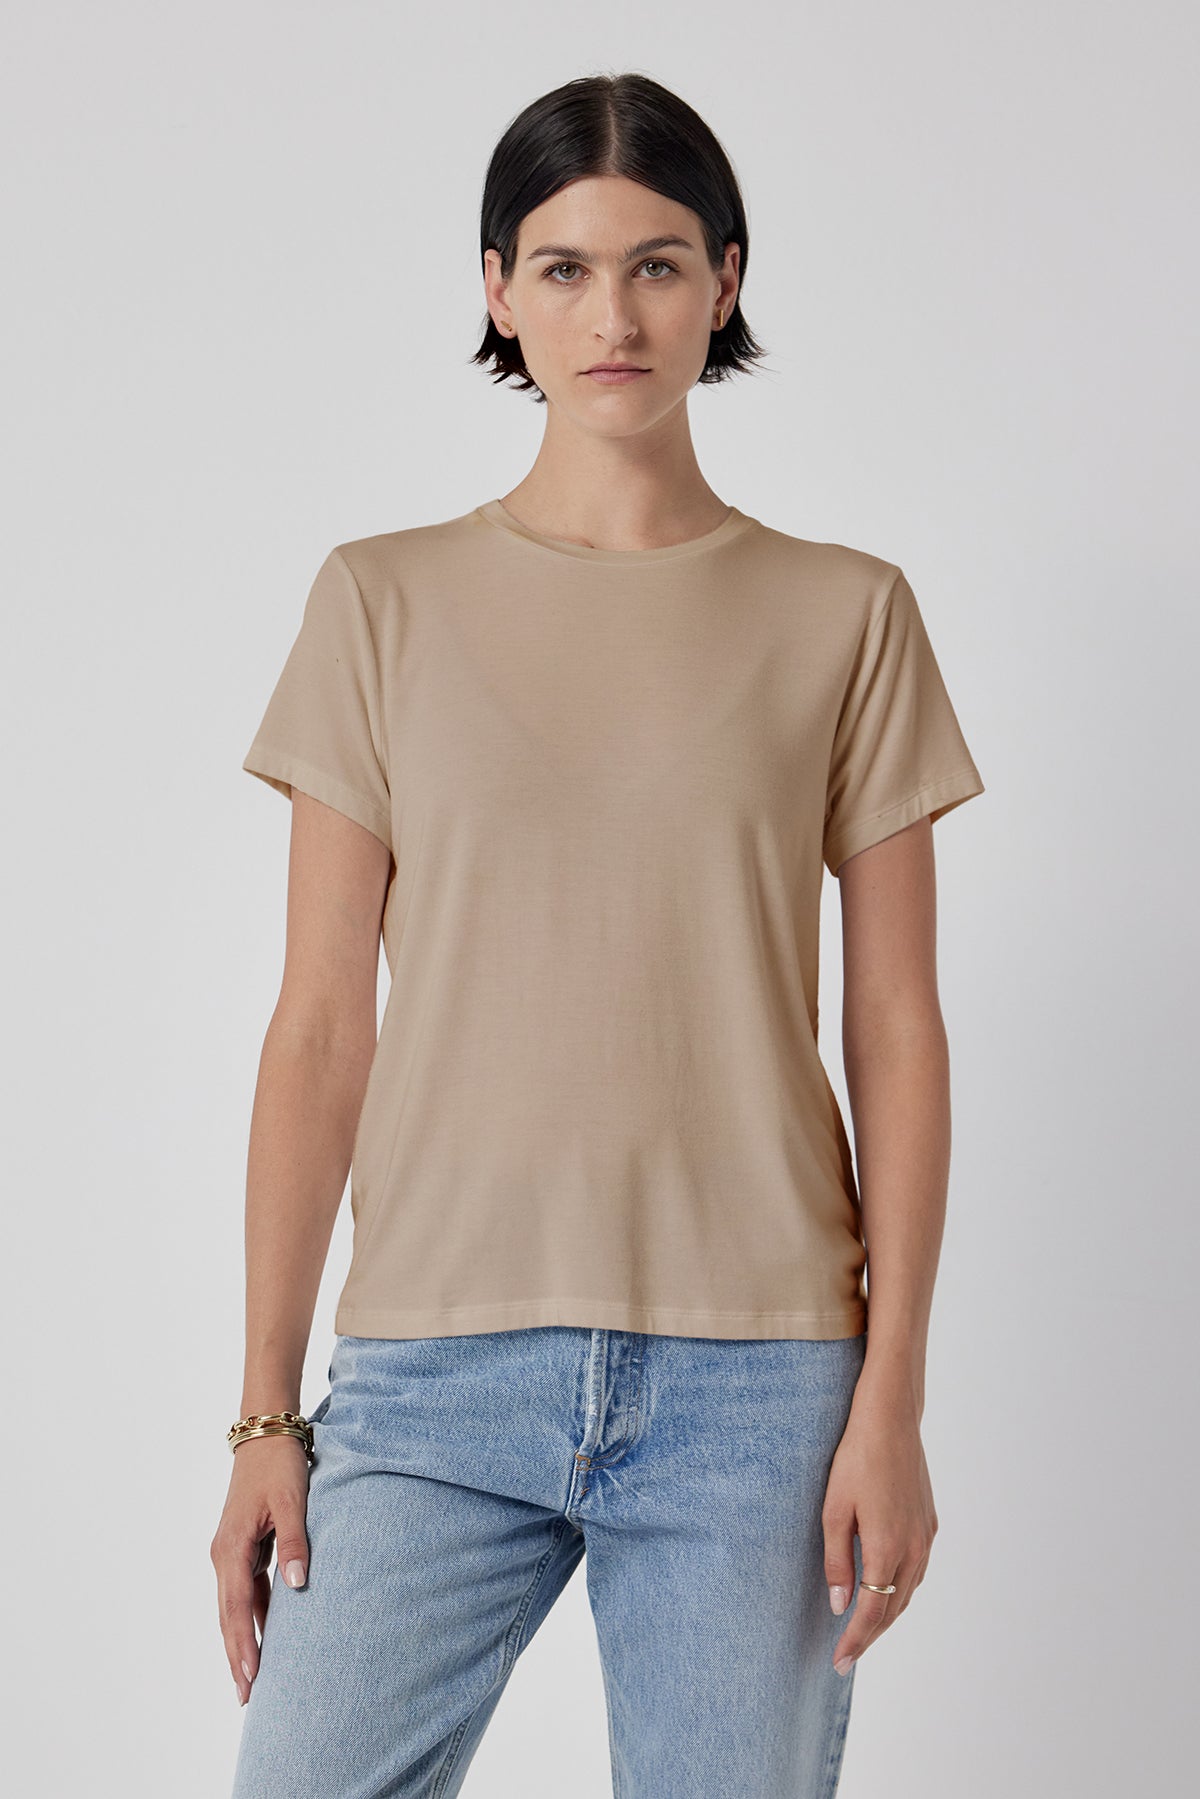 Woman modeling a classic Solana Tee by Velvet by Jenny Graham in beige and blue jeans against a white background.-36290532344001